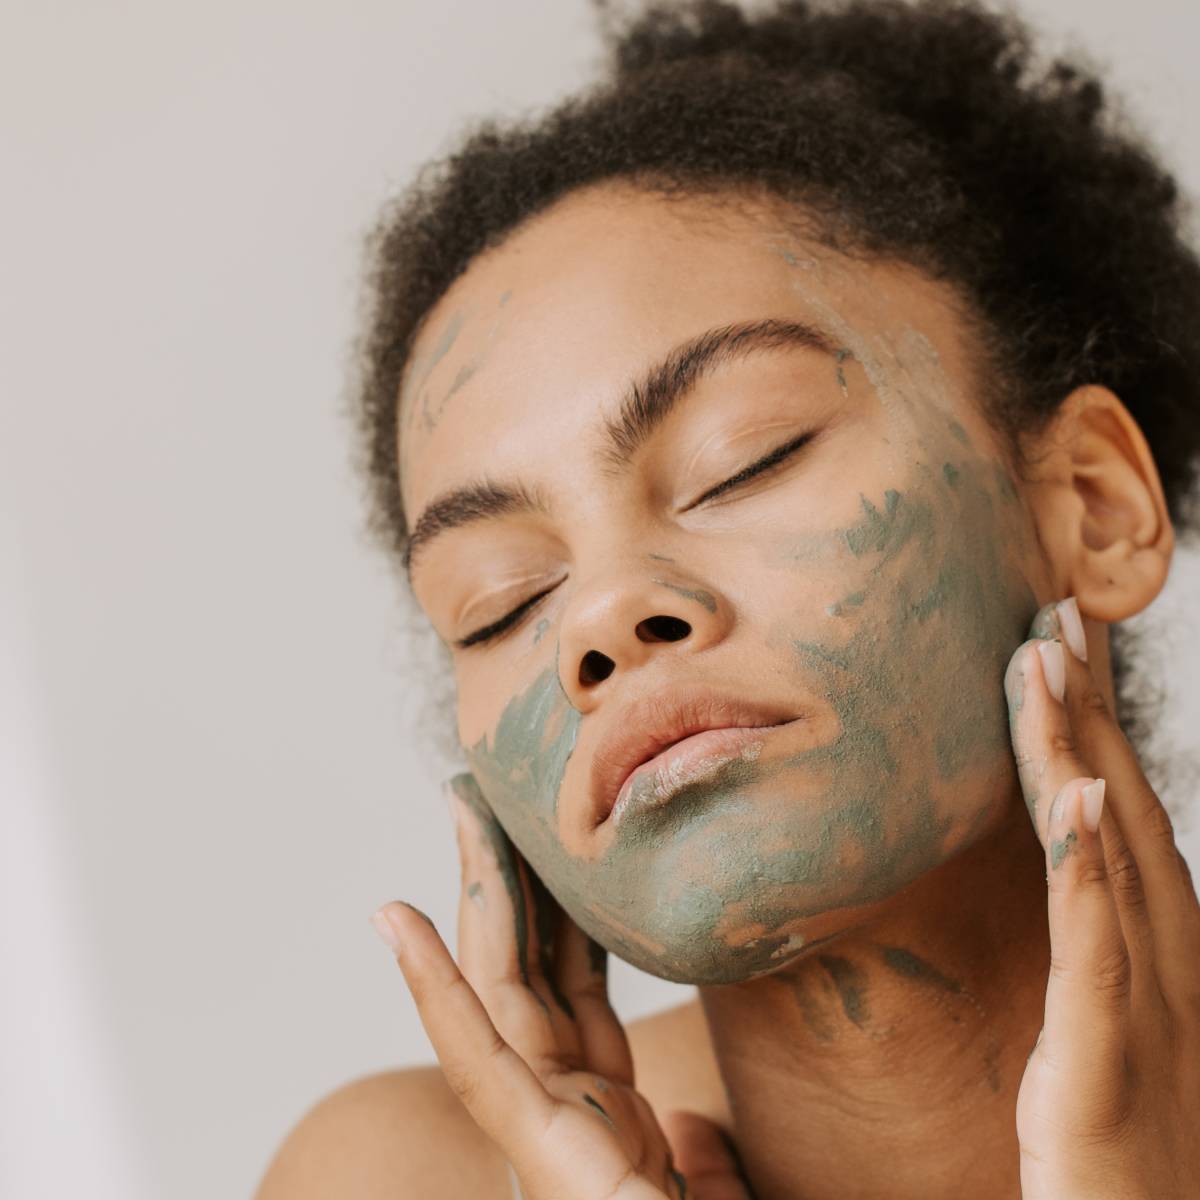 Use a Face Mask Once a Week private skin care label